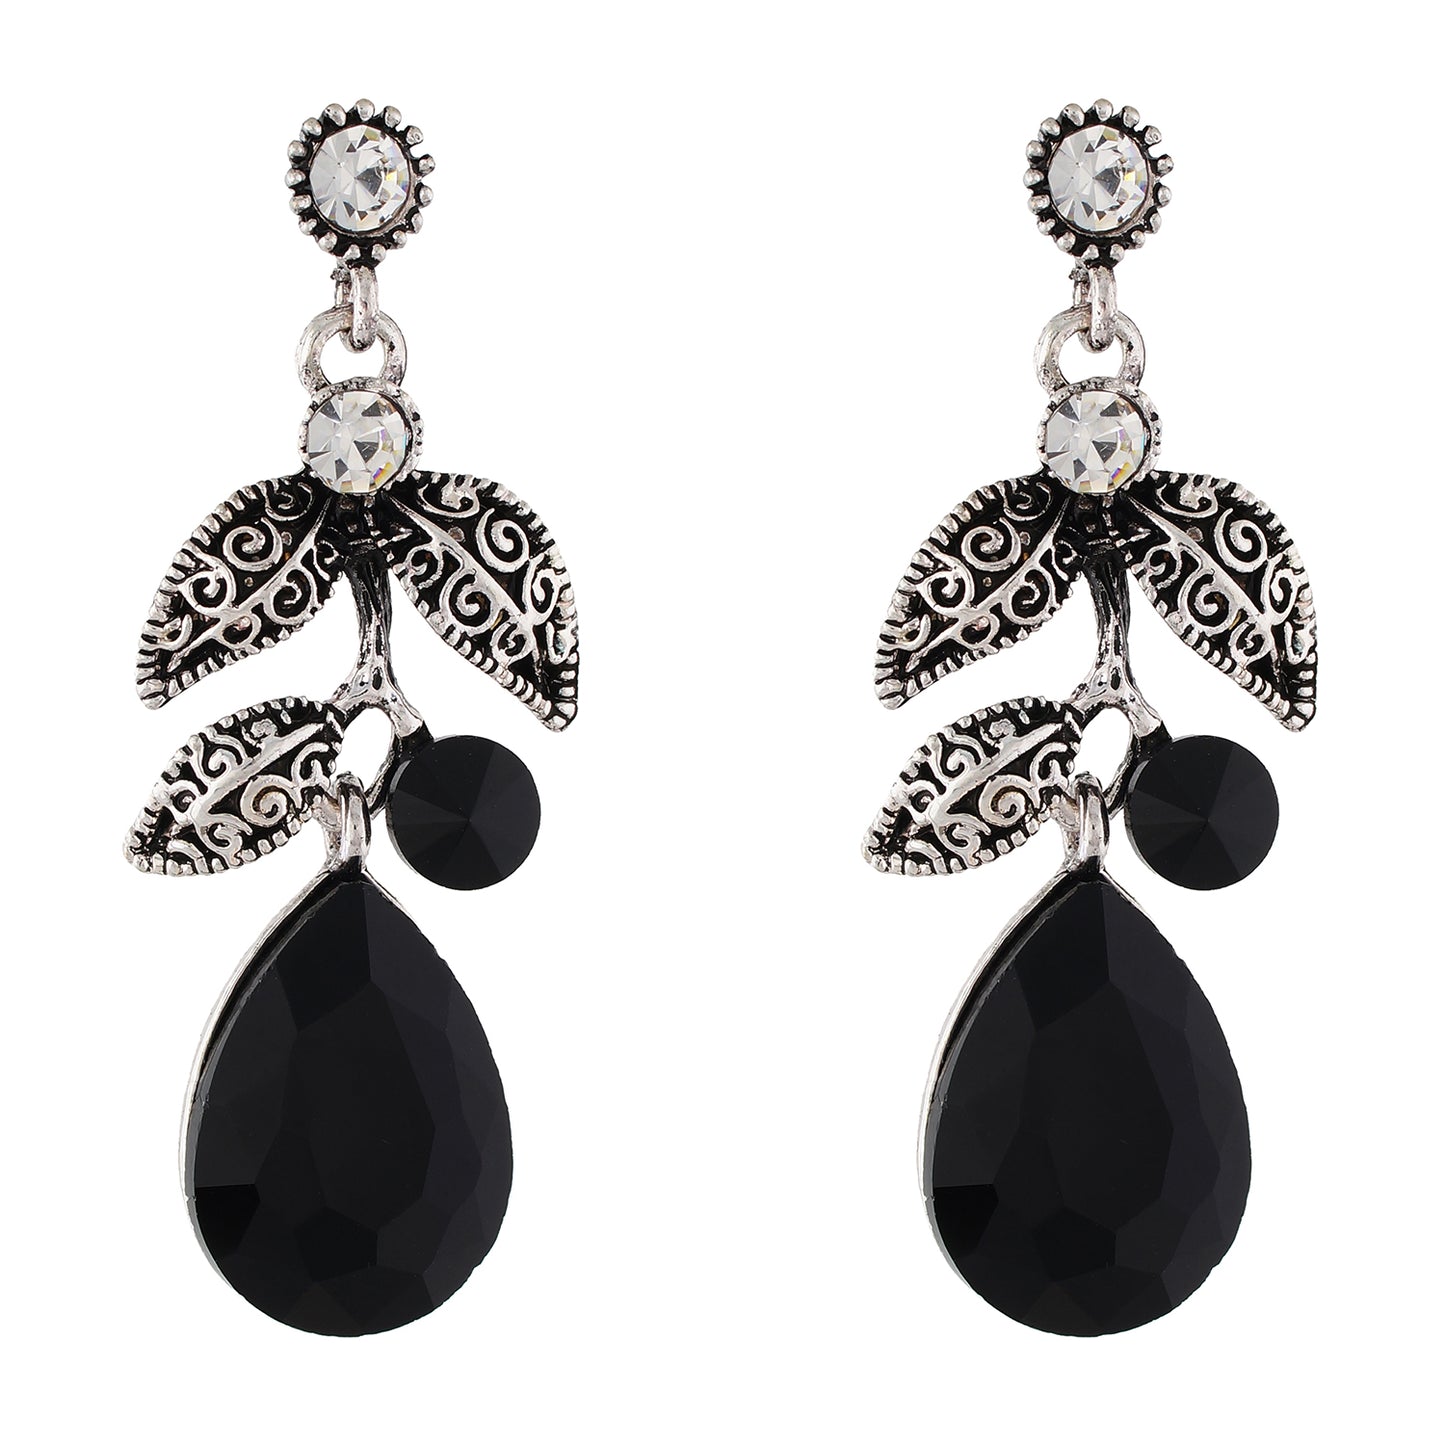 Amazing Black and Oxide Silver Colour Leaves Design Earring for Girls and Women